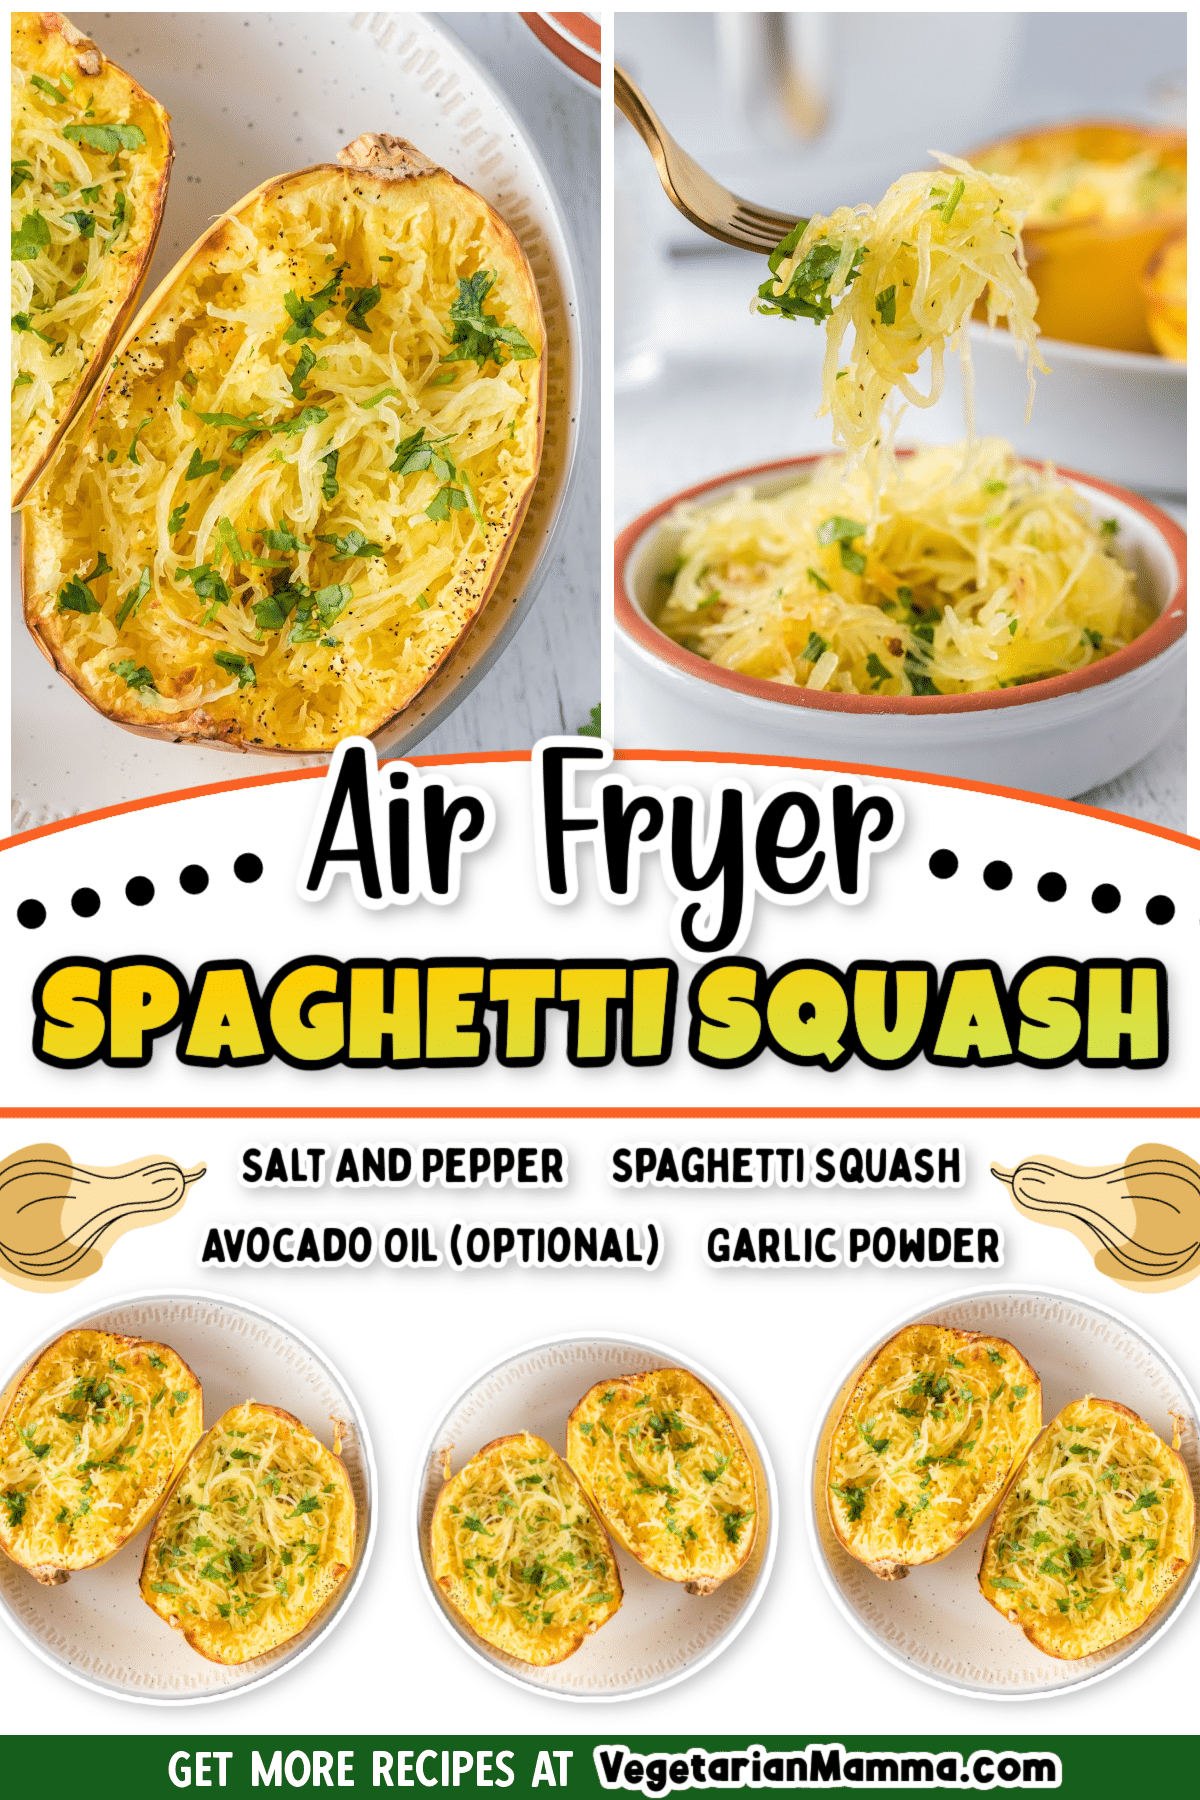 Roasted air fryer spaghetti squash takes less than 20 minutes to cook perfectly! Enjoy it plain, or toss it with your favorite pasta sauces for a low-carb, gluten-free meal.